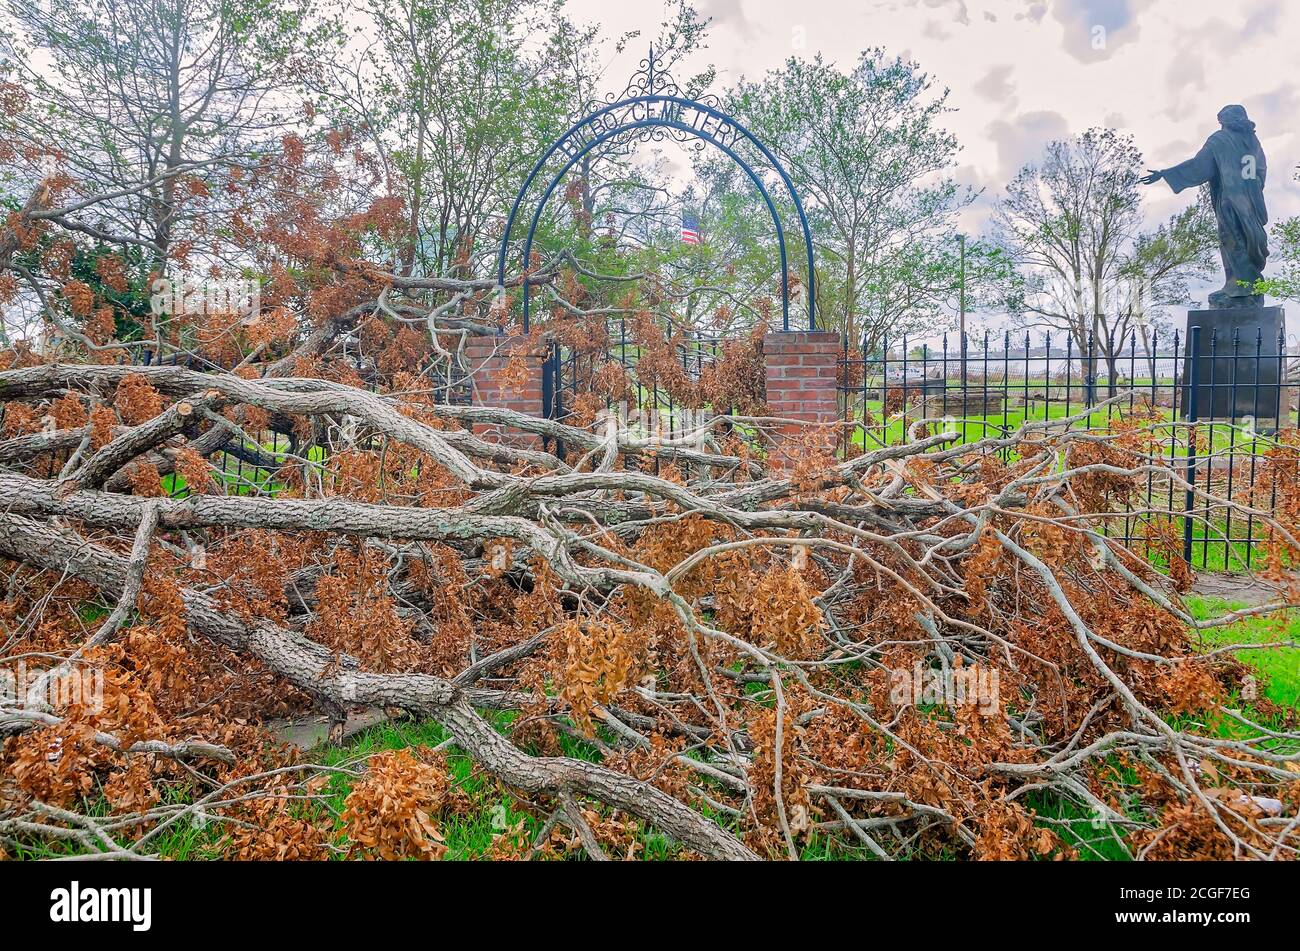 Fallen trees and debris from Hurricane Laura lay in front of the entrance to Bilbo Cemetery, Sept. 9, 2020, in Lake Charles, Louisiana. Stock Photo